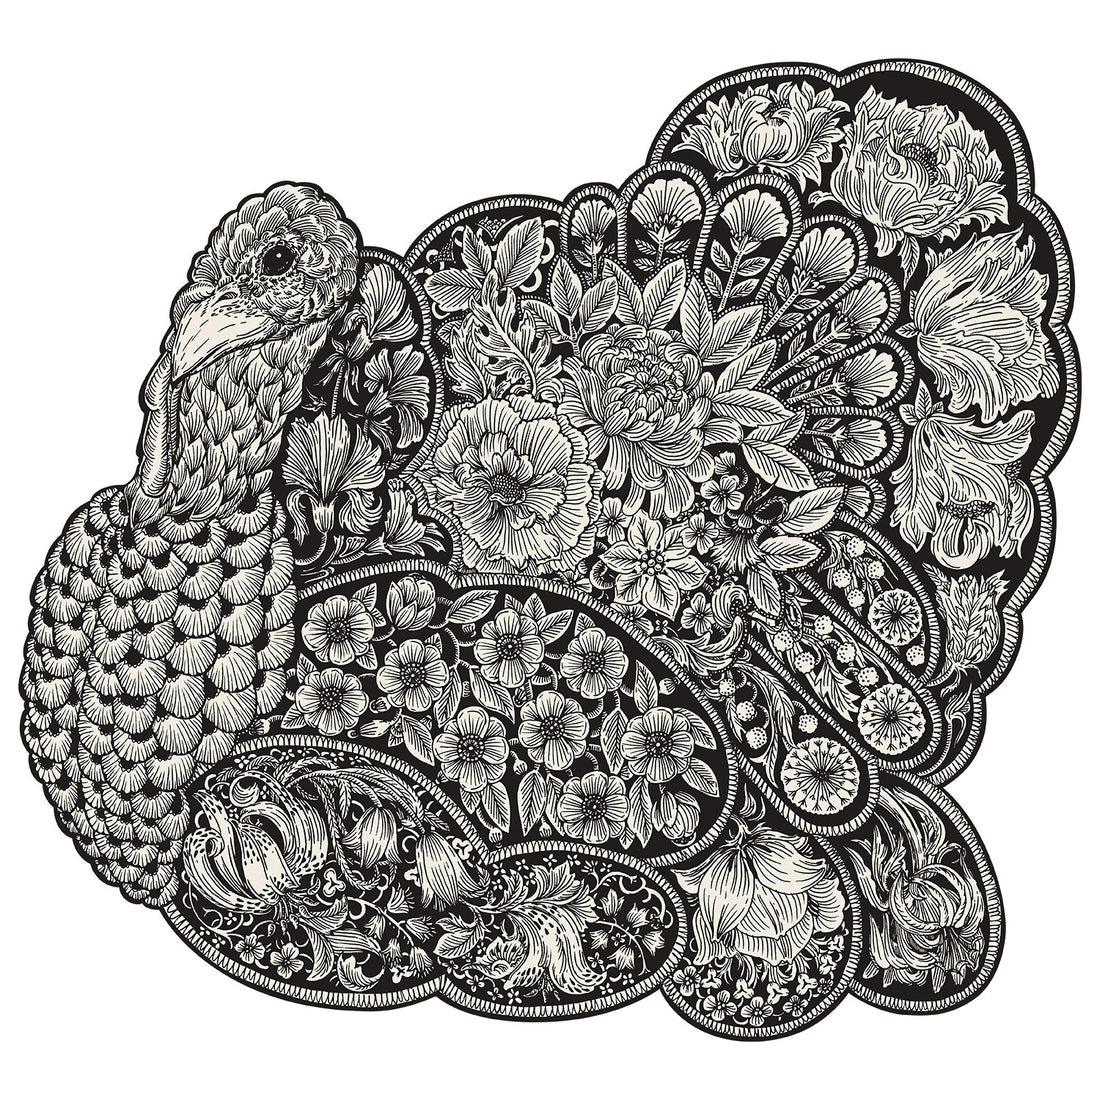 A black and white illustration of a plump turkey, containing densely-packed floral designs in the body, wings and tail. 